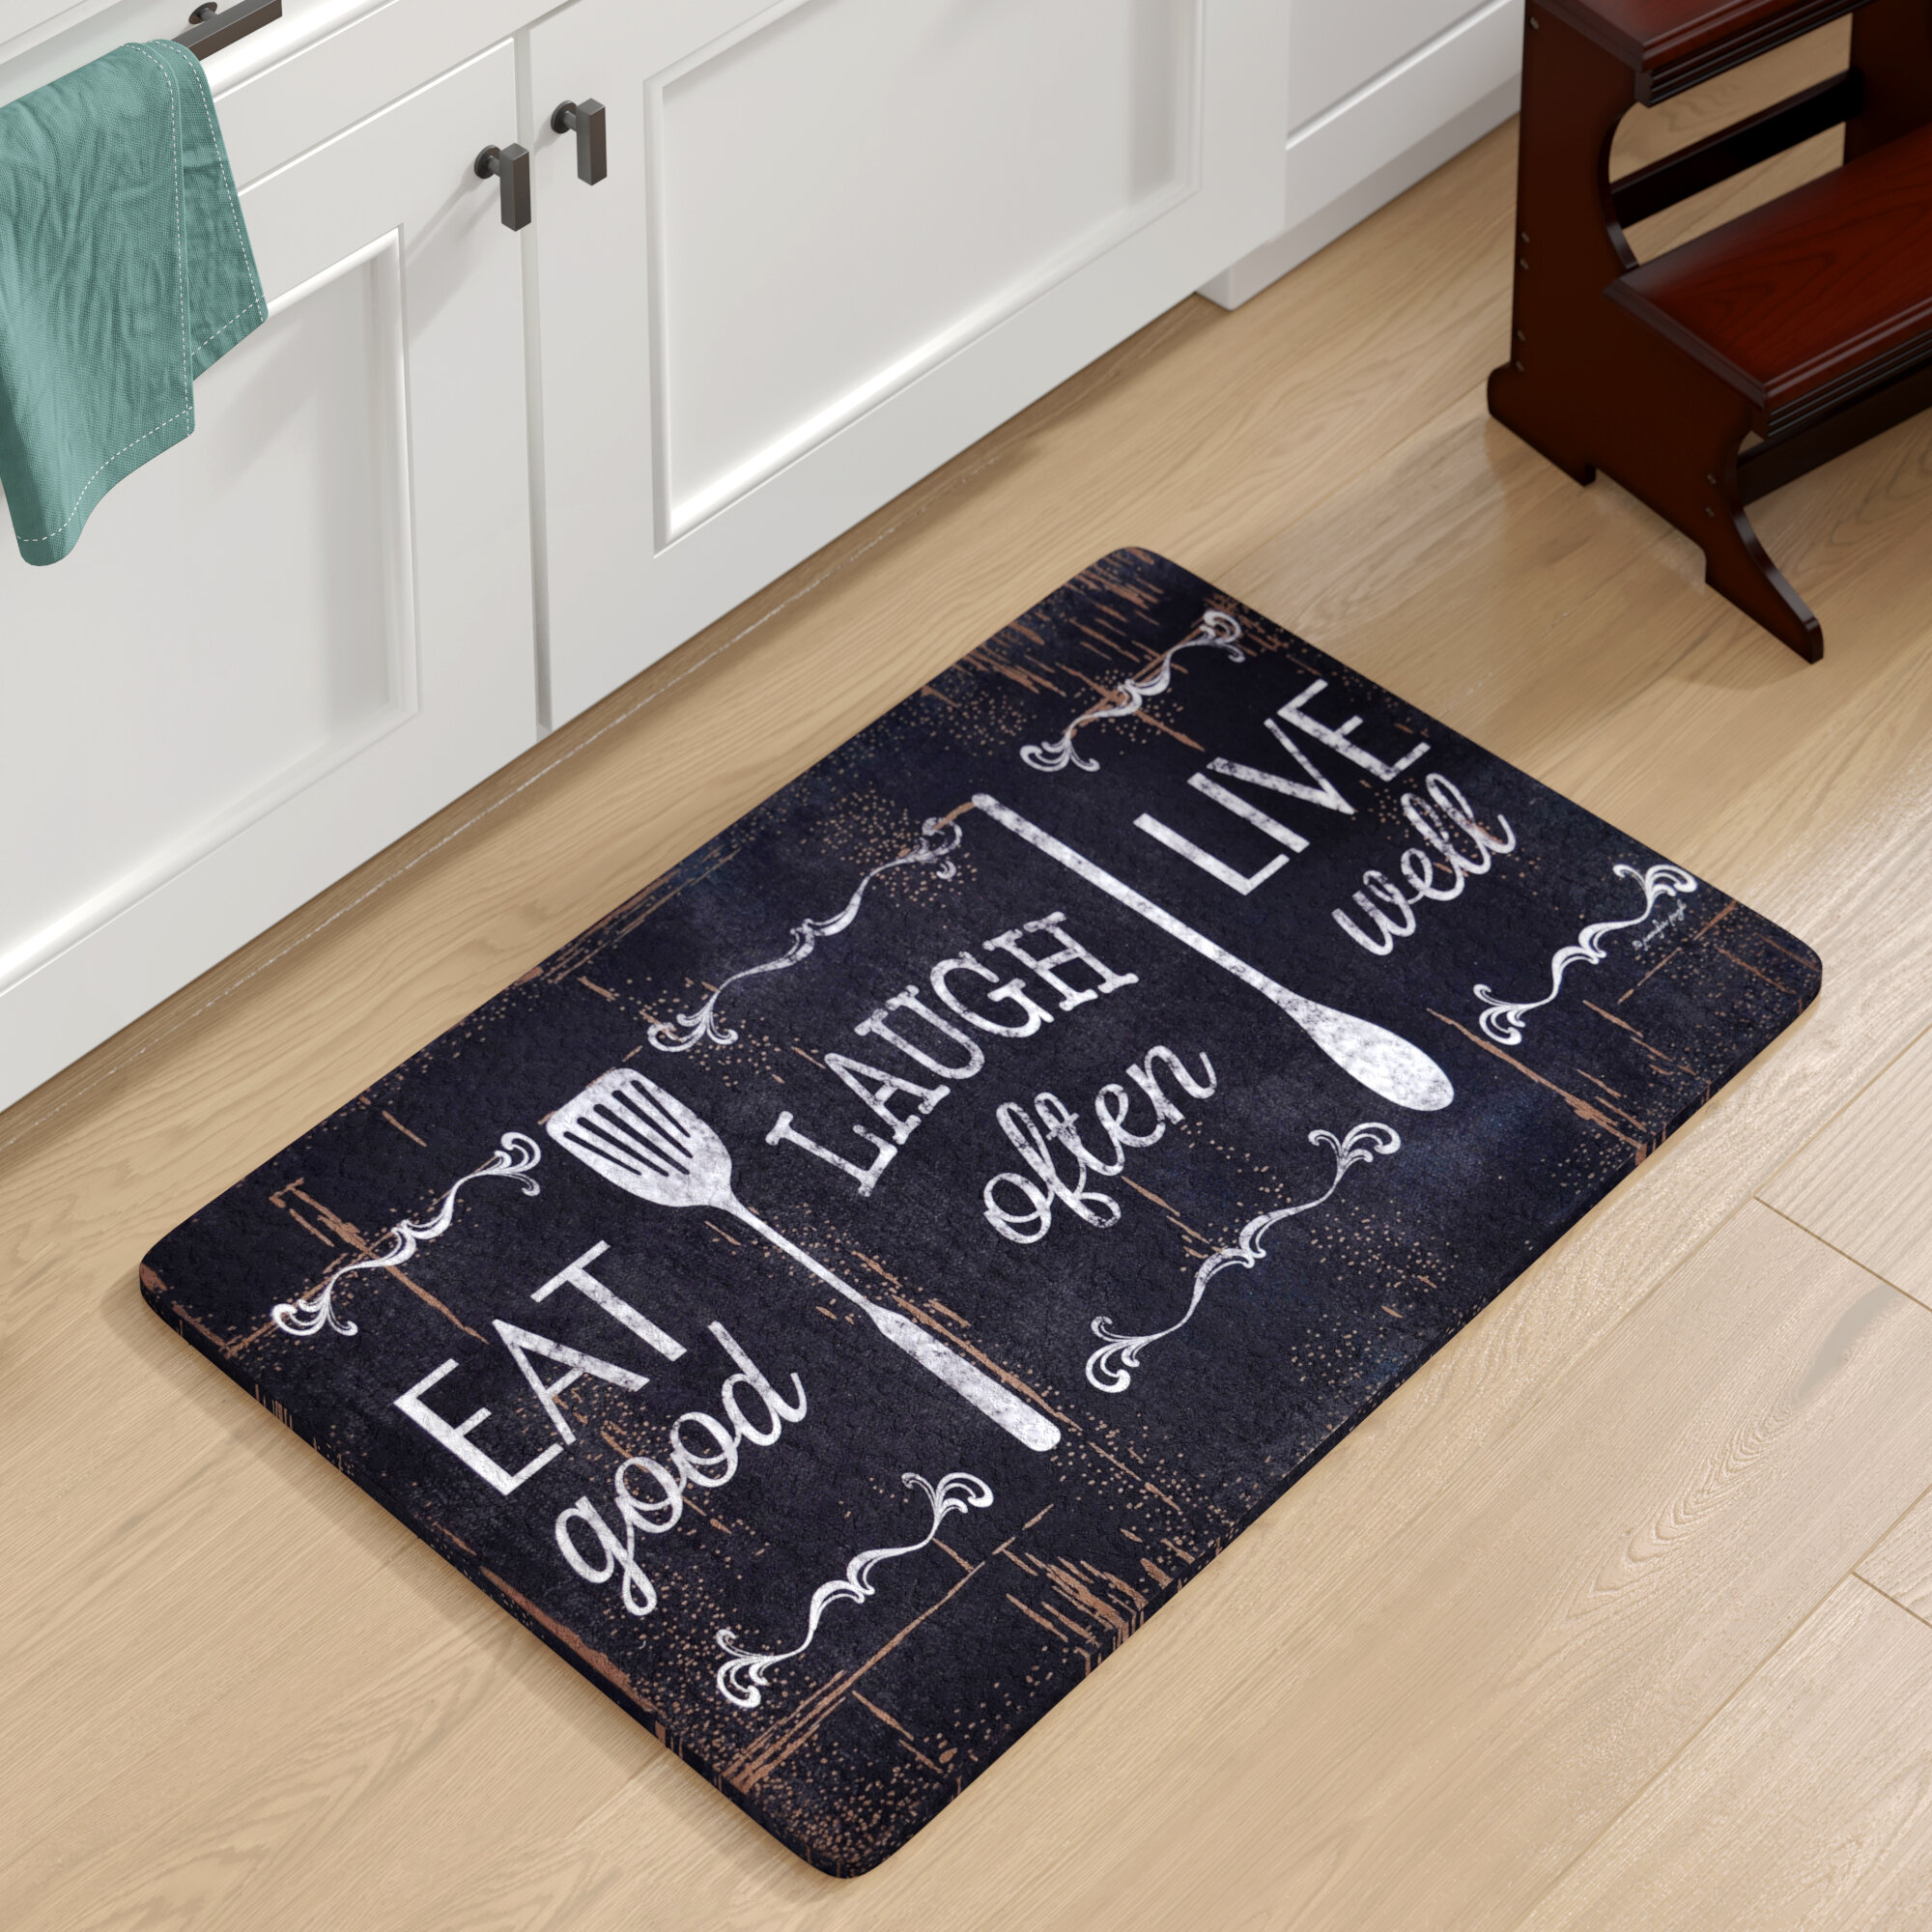 3 Expert Tips To Choose A Kitchen Mat, Kitchen Mats To Protect Hardwood Floors